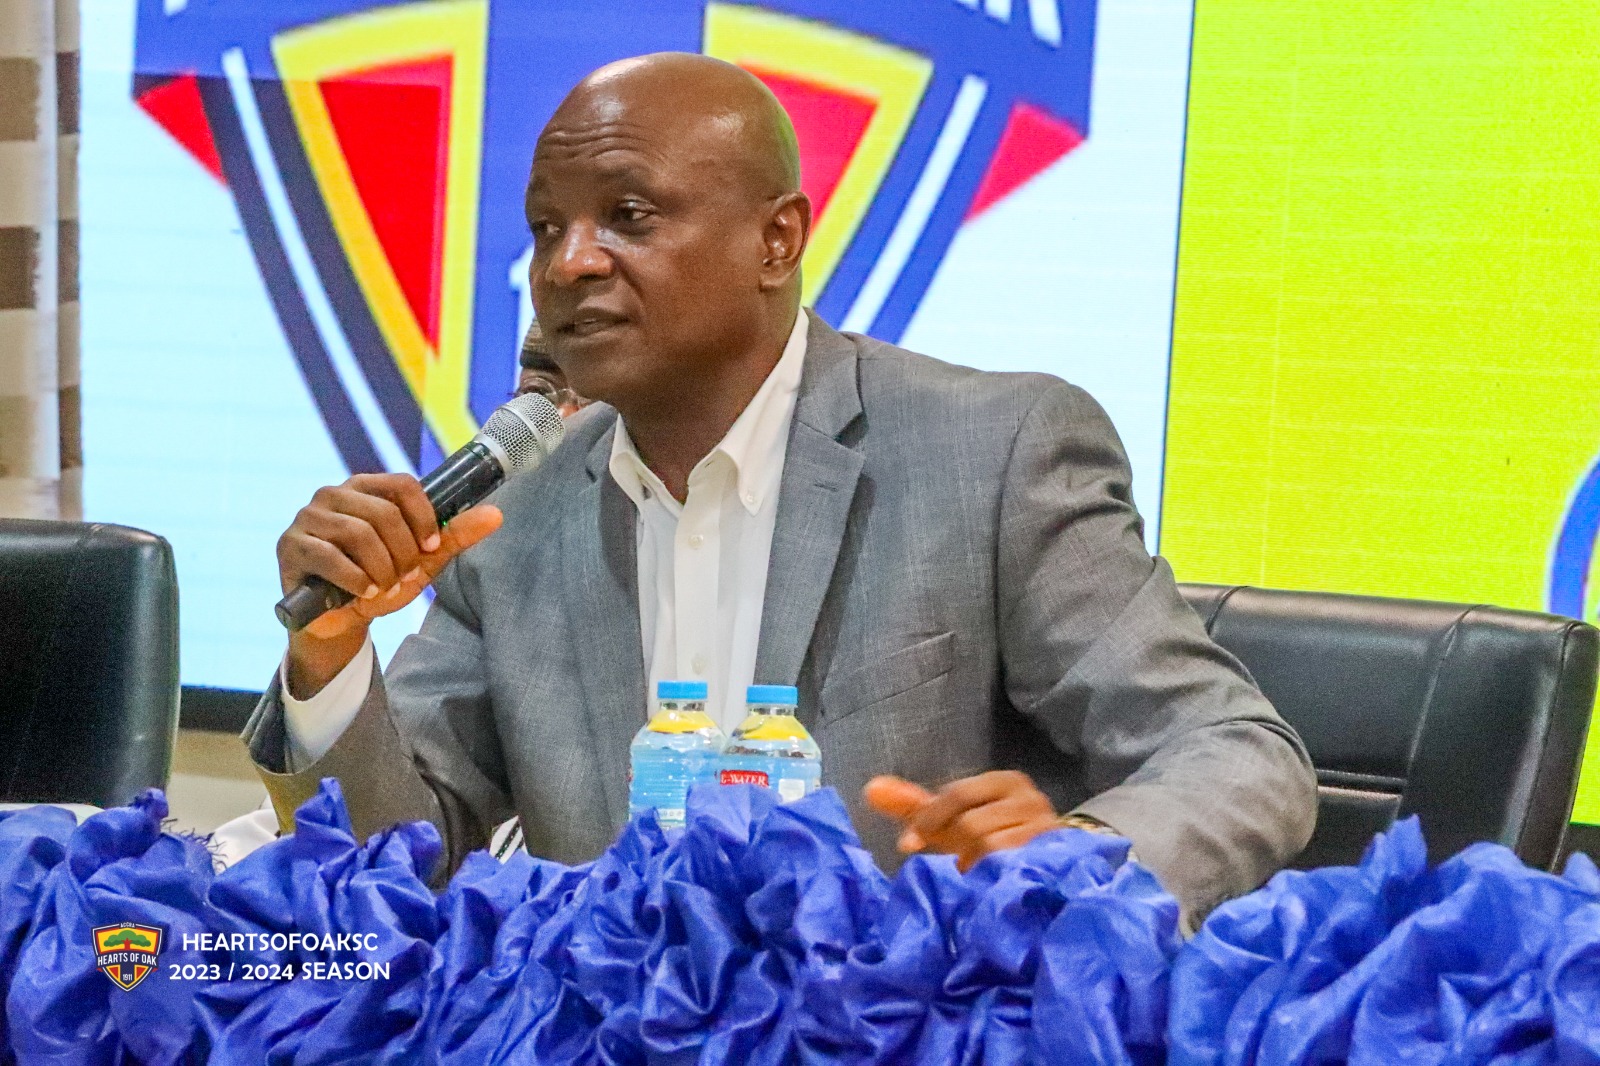 Hearts of Oak fans sometimes worry themselves unnecessarily – Togbe Afede